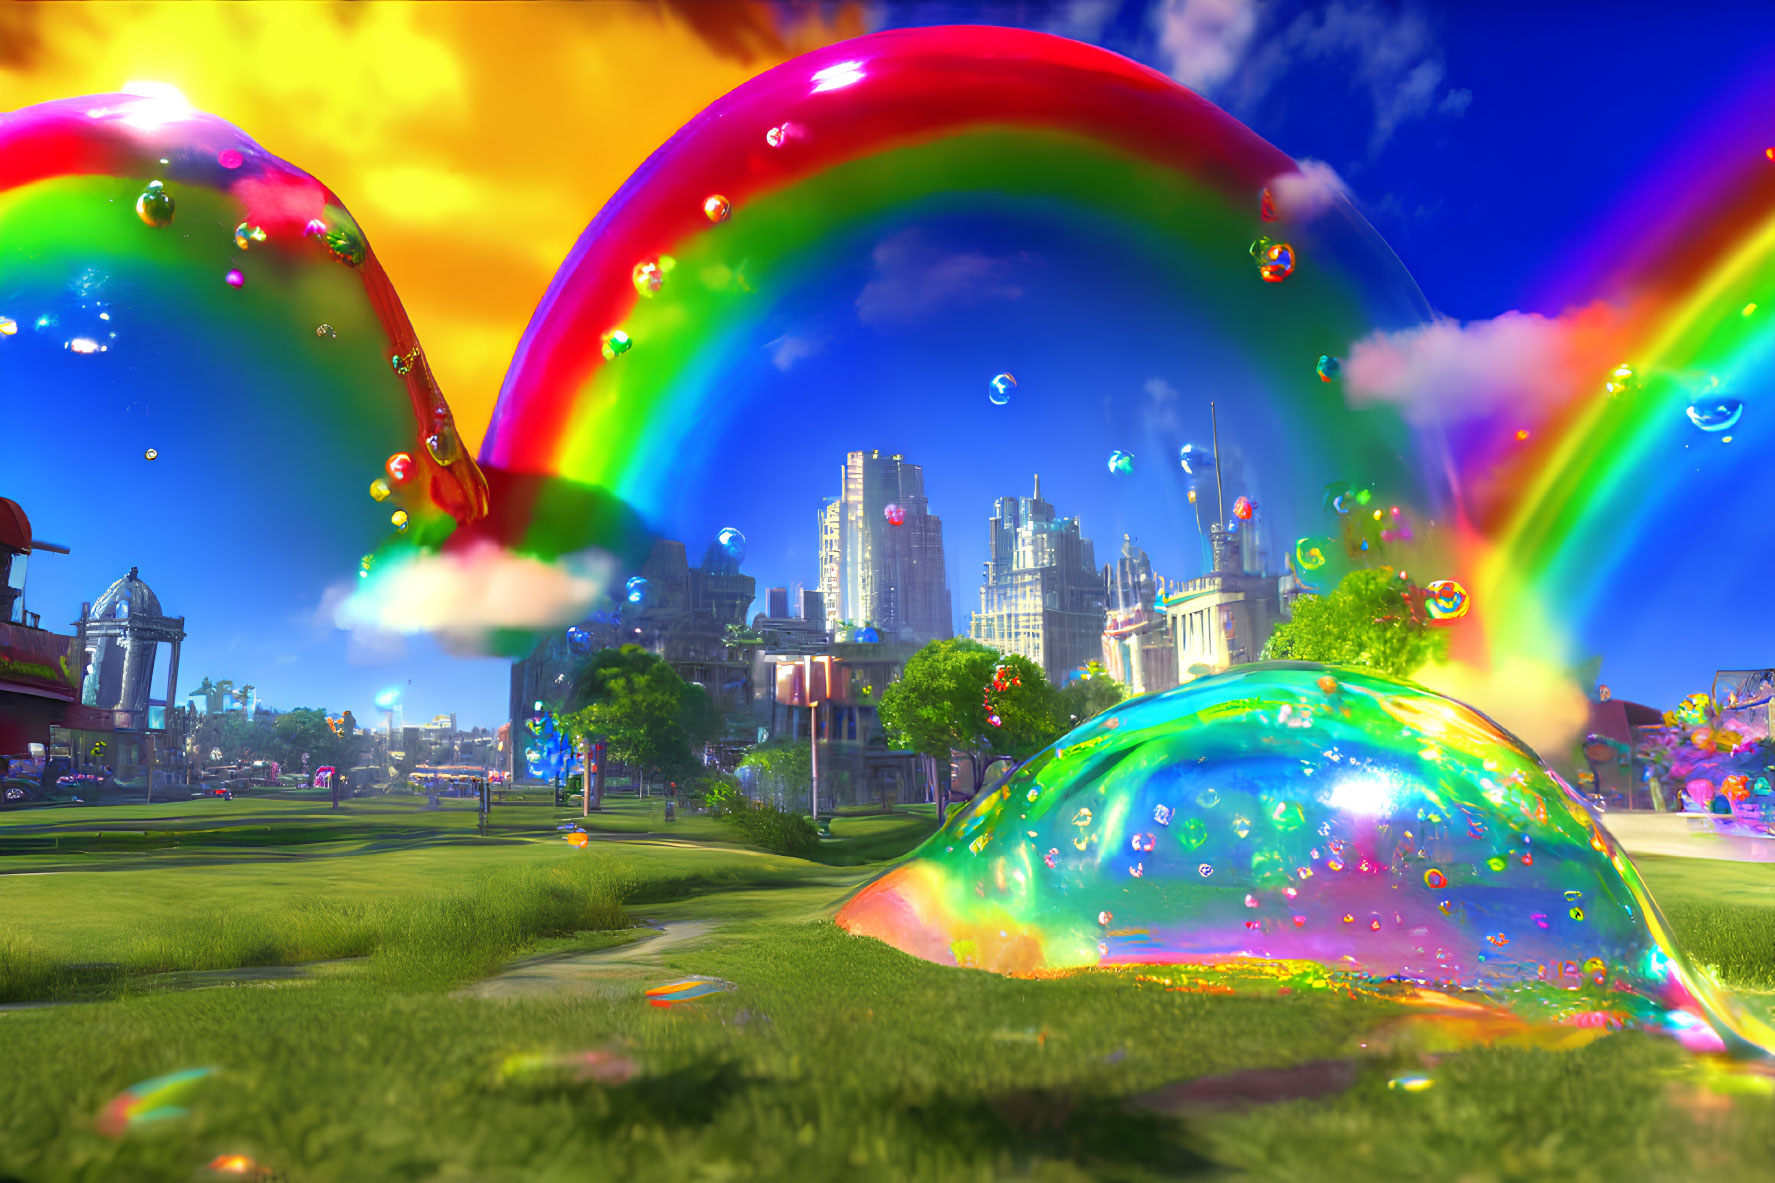 Colorful cityscape with giant bubbles and rainbow in clear sky